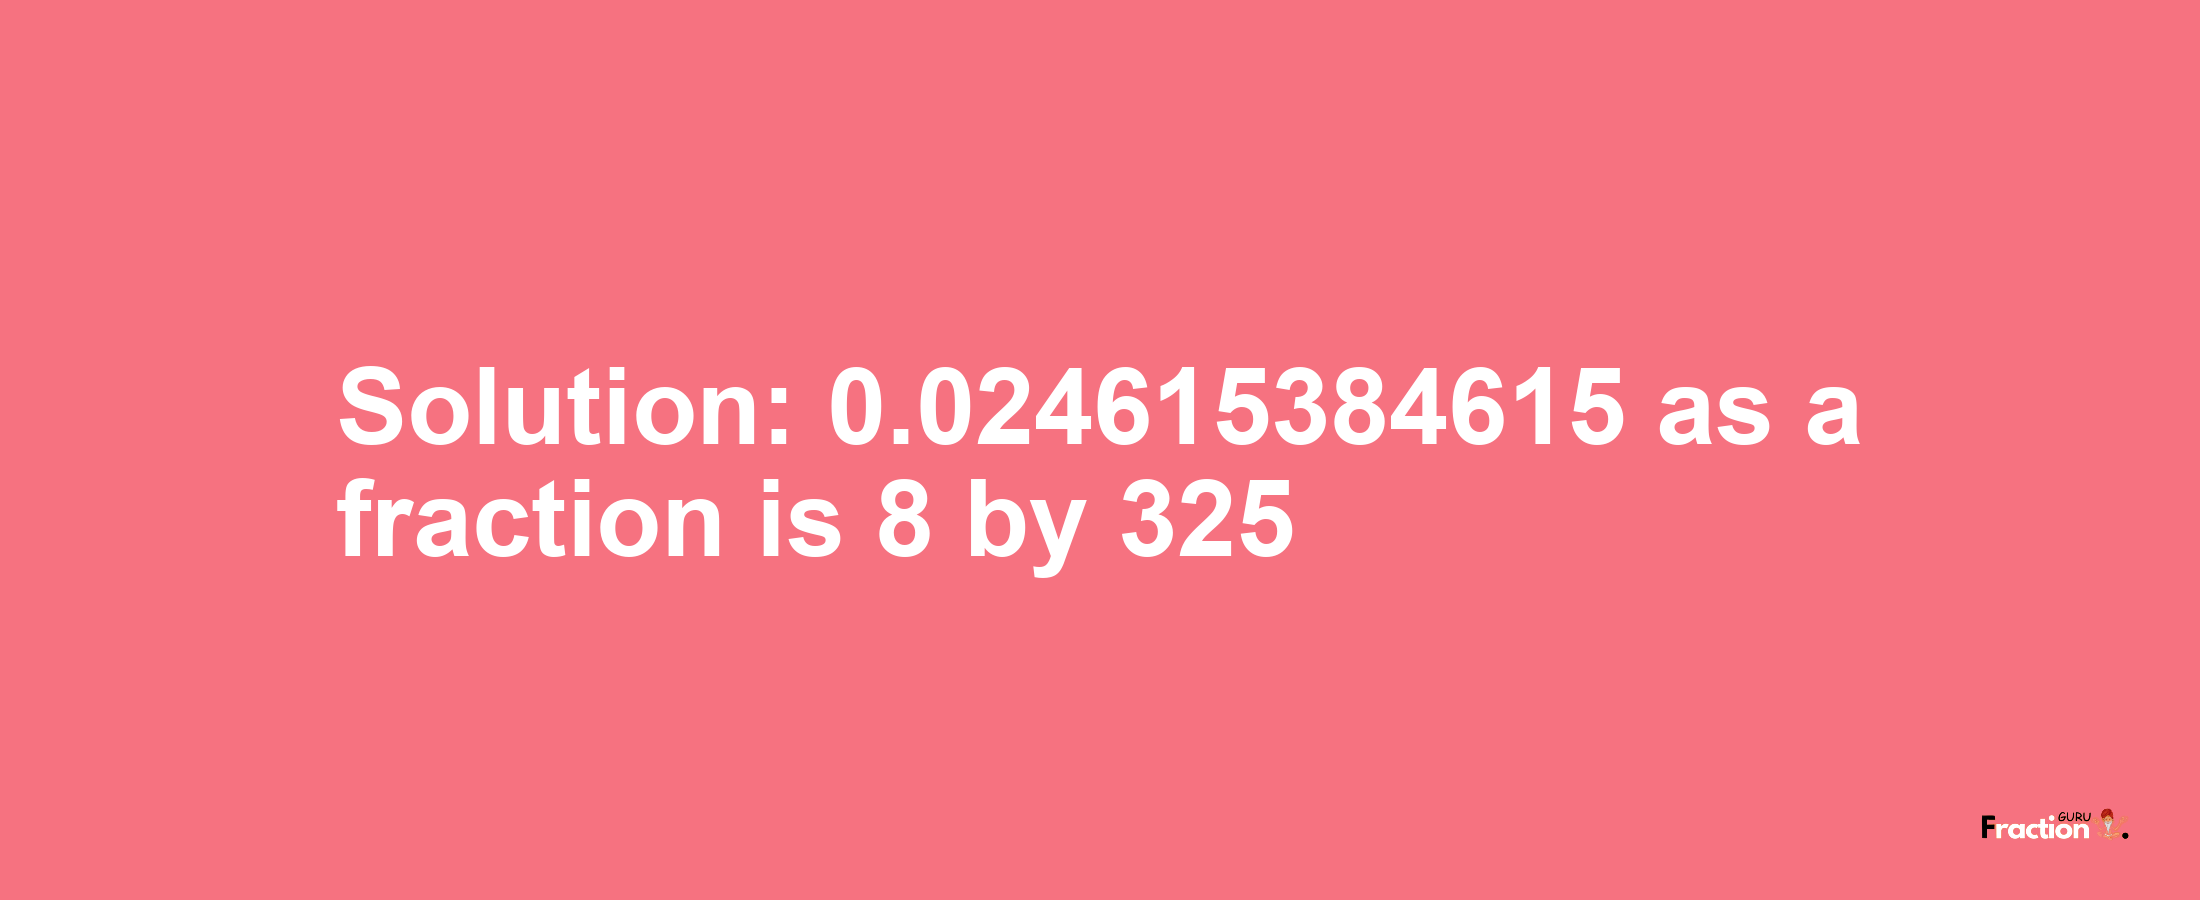 Solution:0.024615384615 as a fraction is 8/325